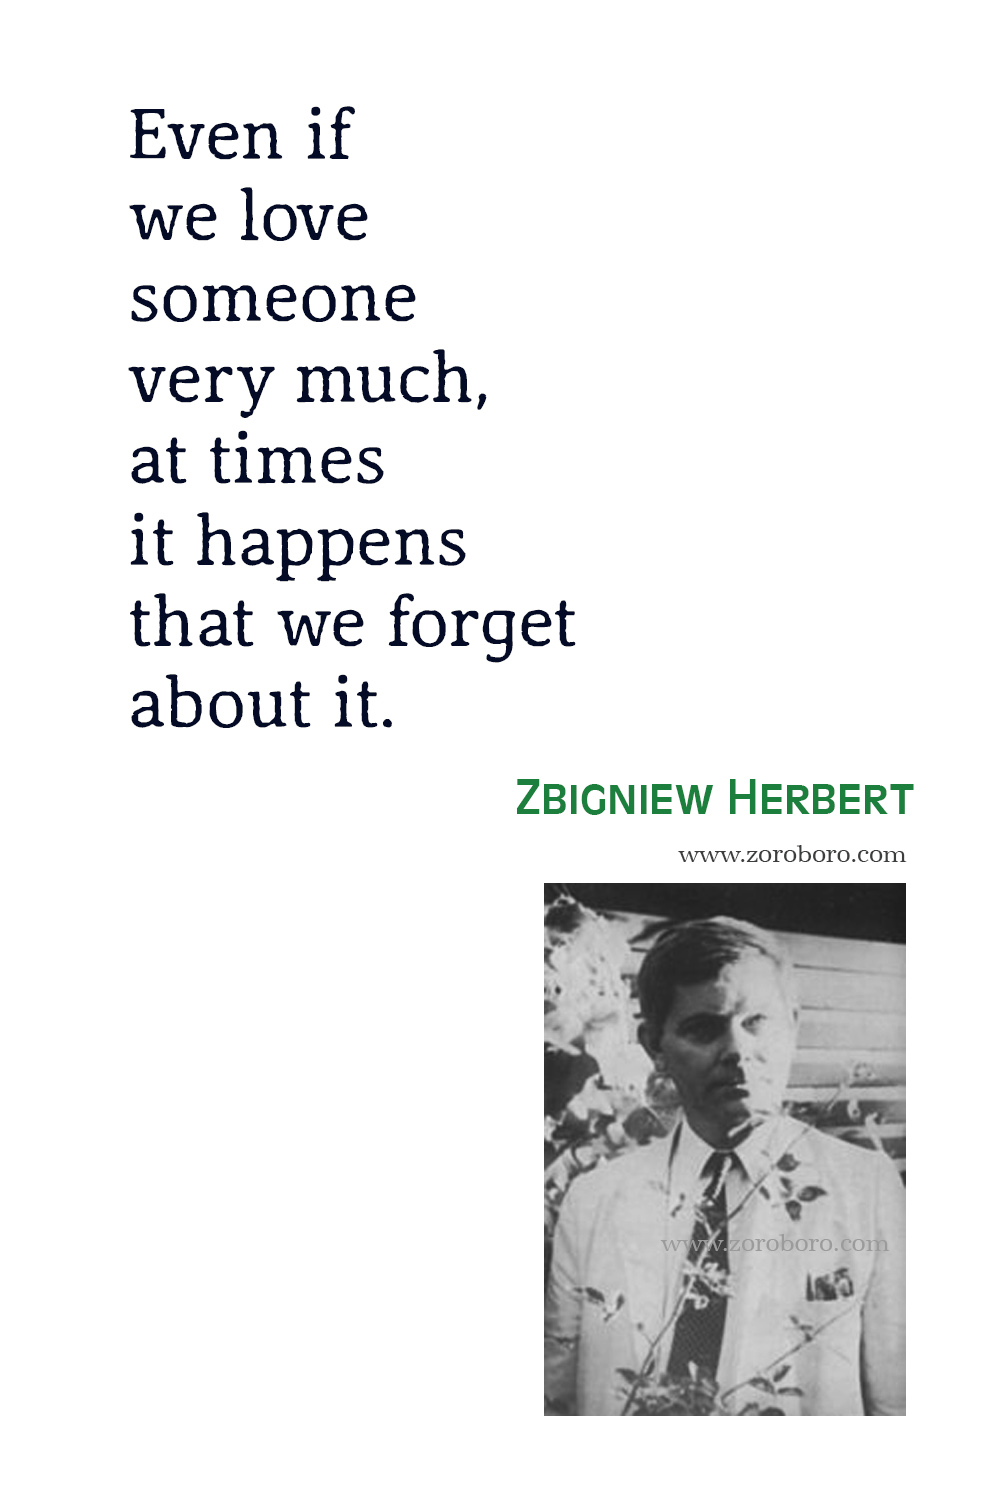 Zbigniew Herbert Quotes, Zbigniew Herbert Poems, Zbigniew Herbert Poetry, Zbigniew Herbert Wiersze, The Collected Poems 1956 - 1998